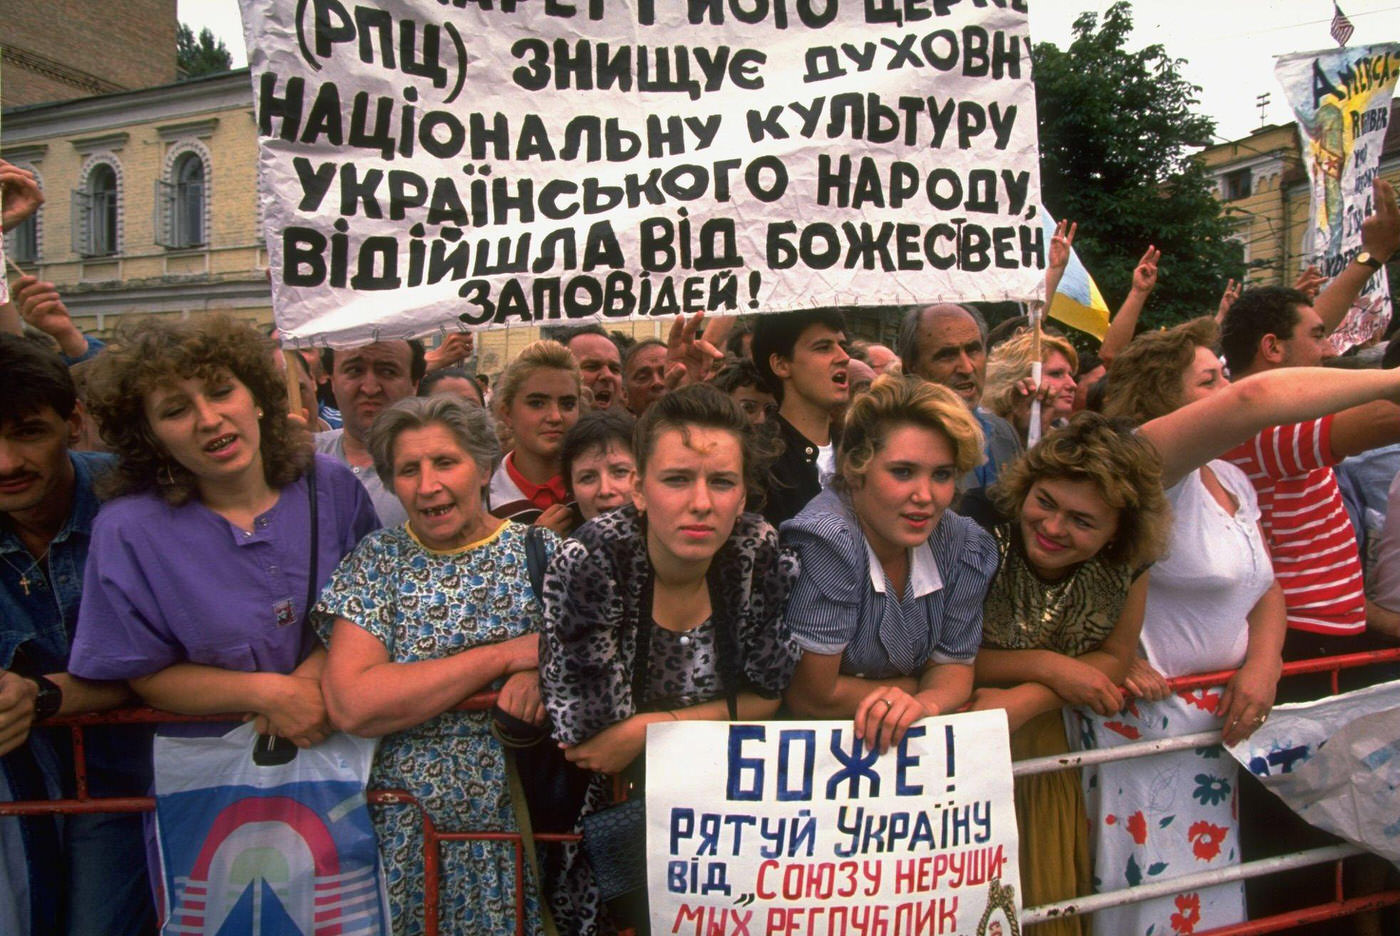 Sign-carrying pro-independence protestors demonstrate during Moscow summit republic-hopping visit by President George H.W. Bush.